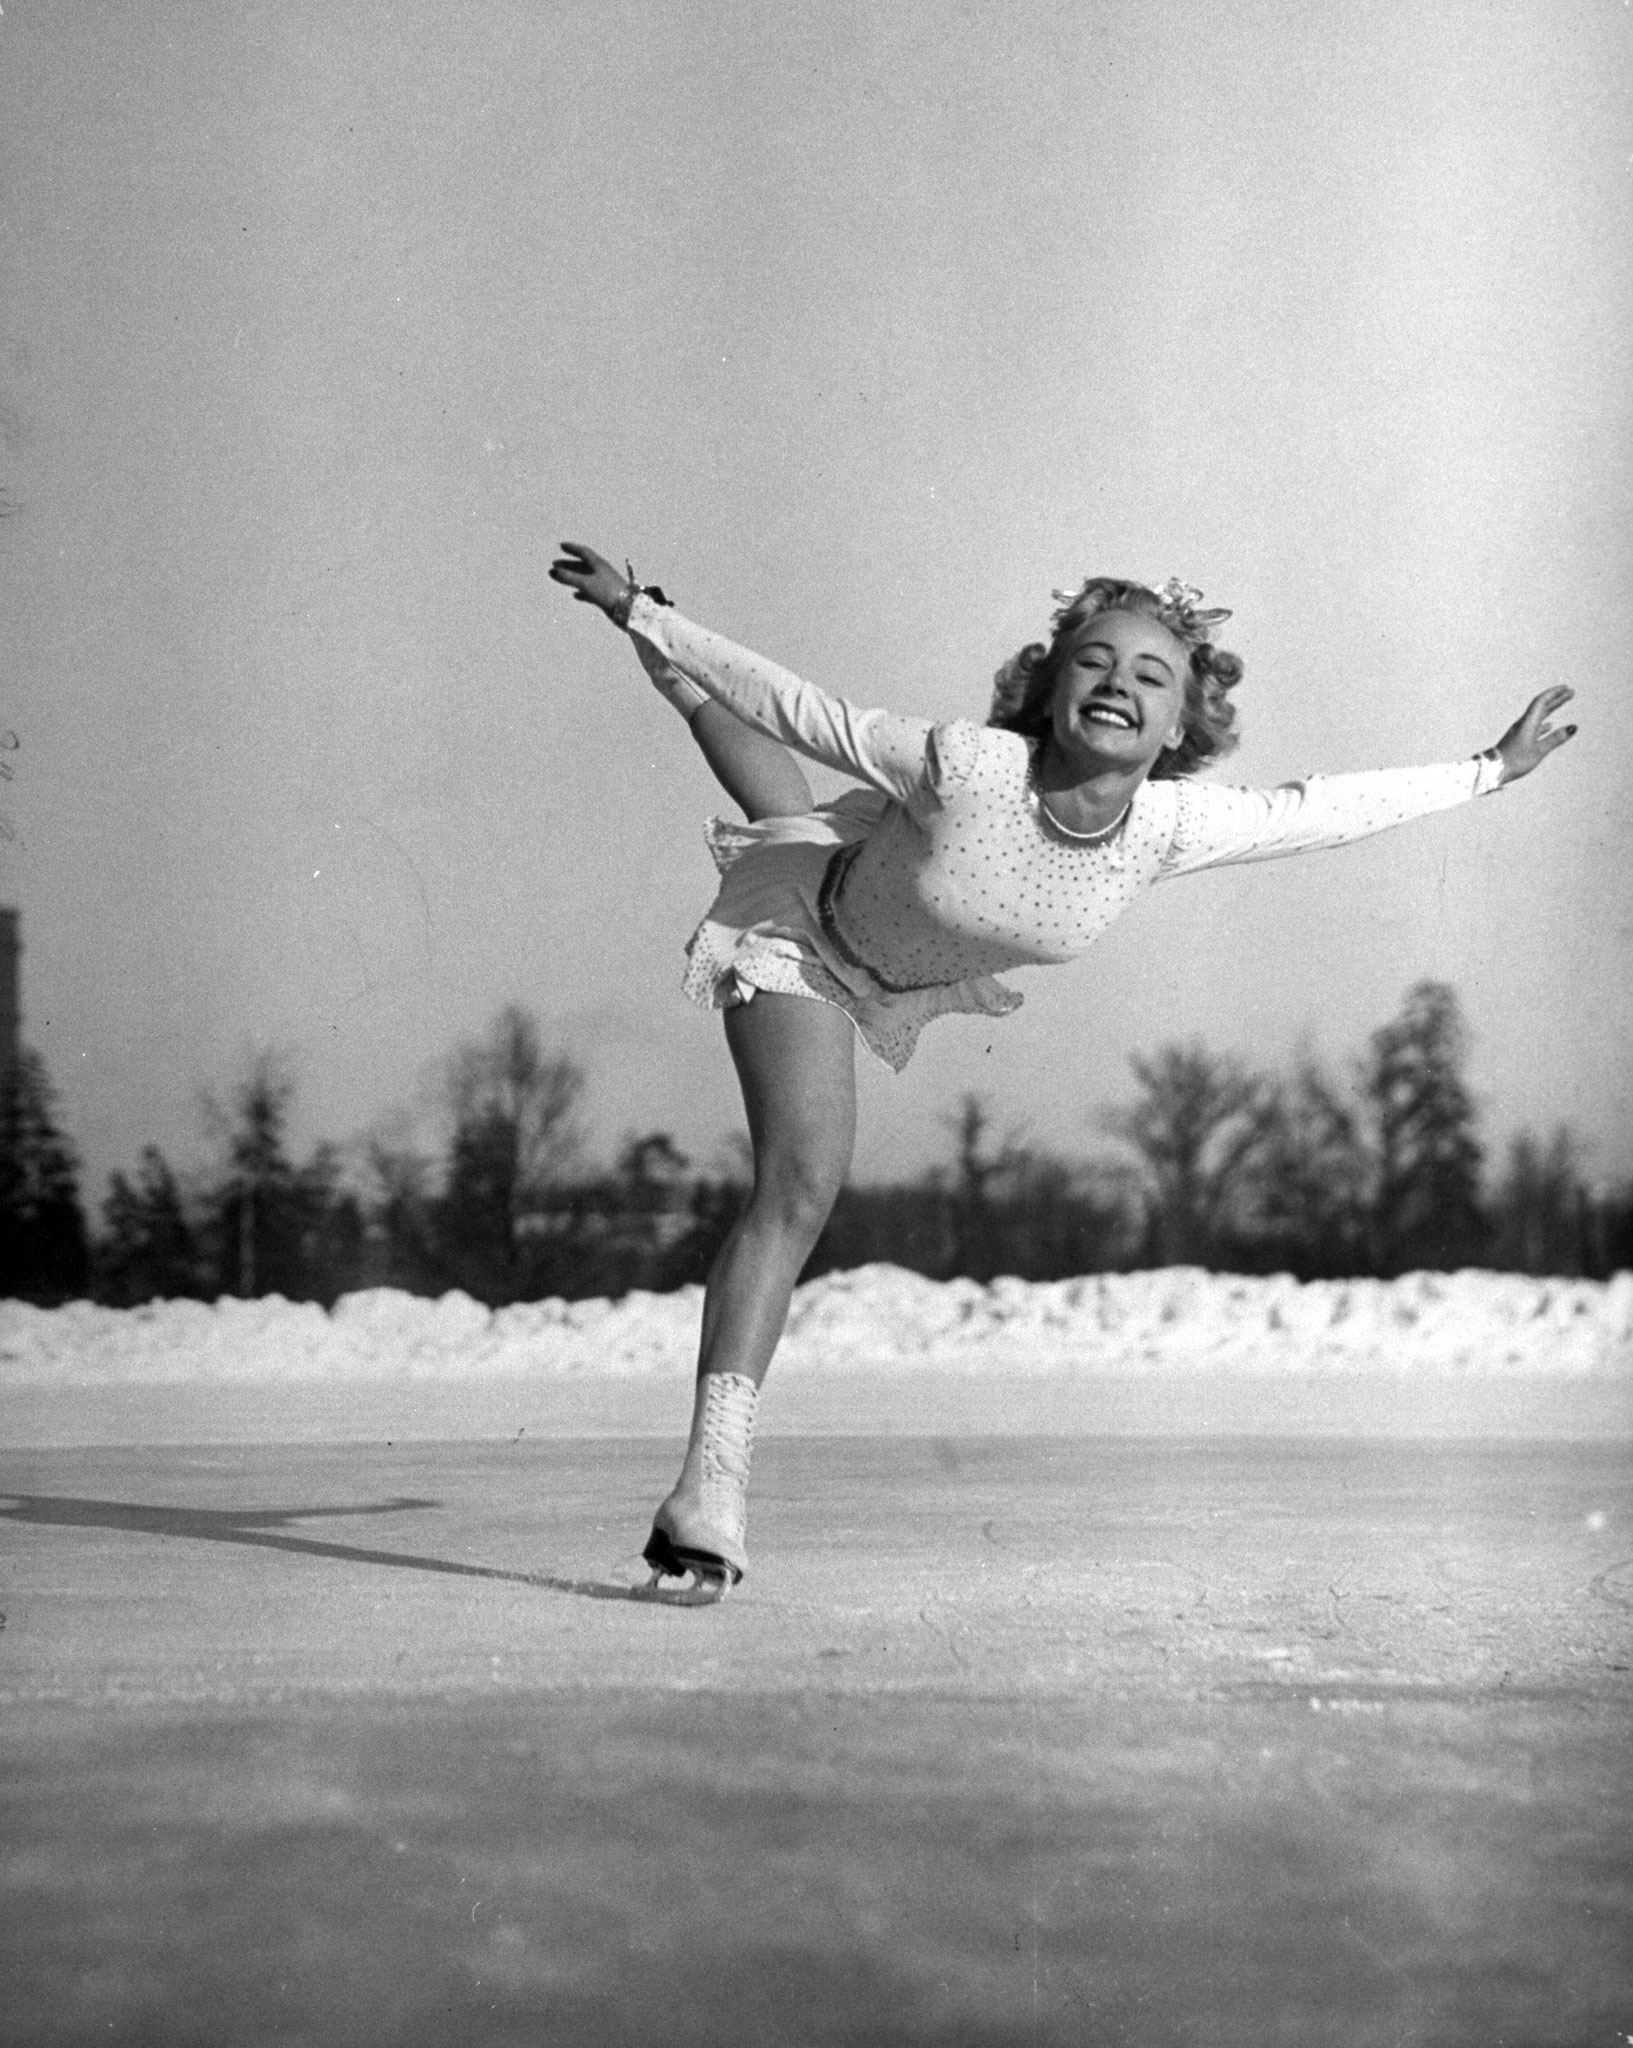 Gretchen Merrill, U.S. champion, was Miss Scott's only serious rival for world title. She spoiled her chances on last day by falling down, won third place.